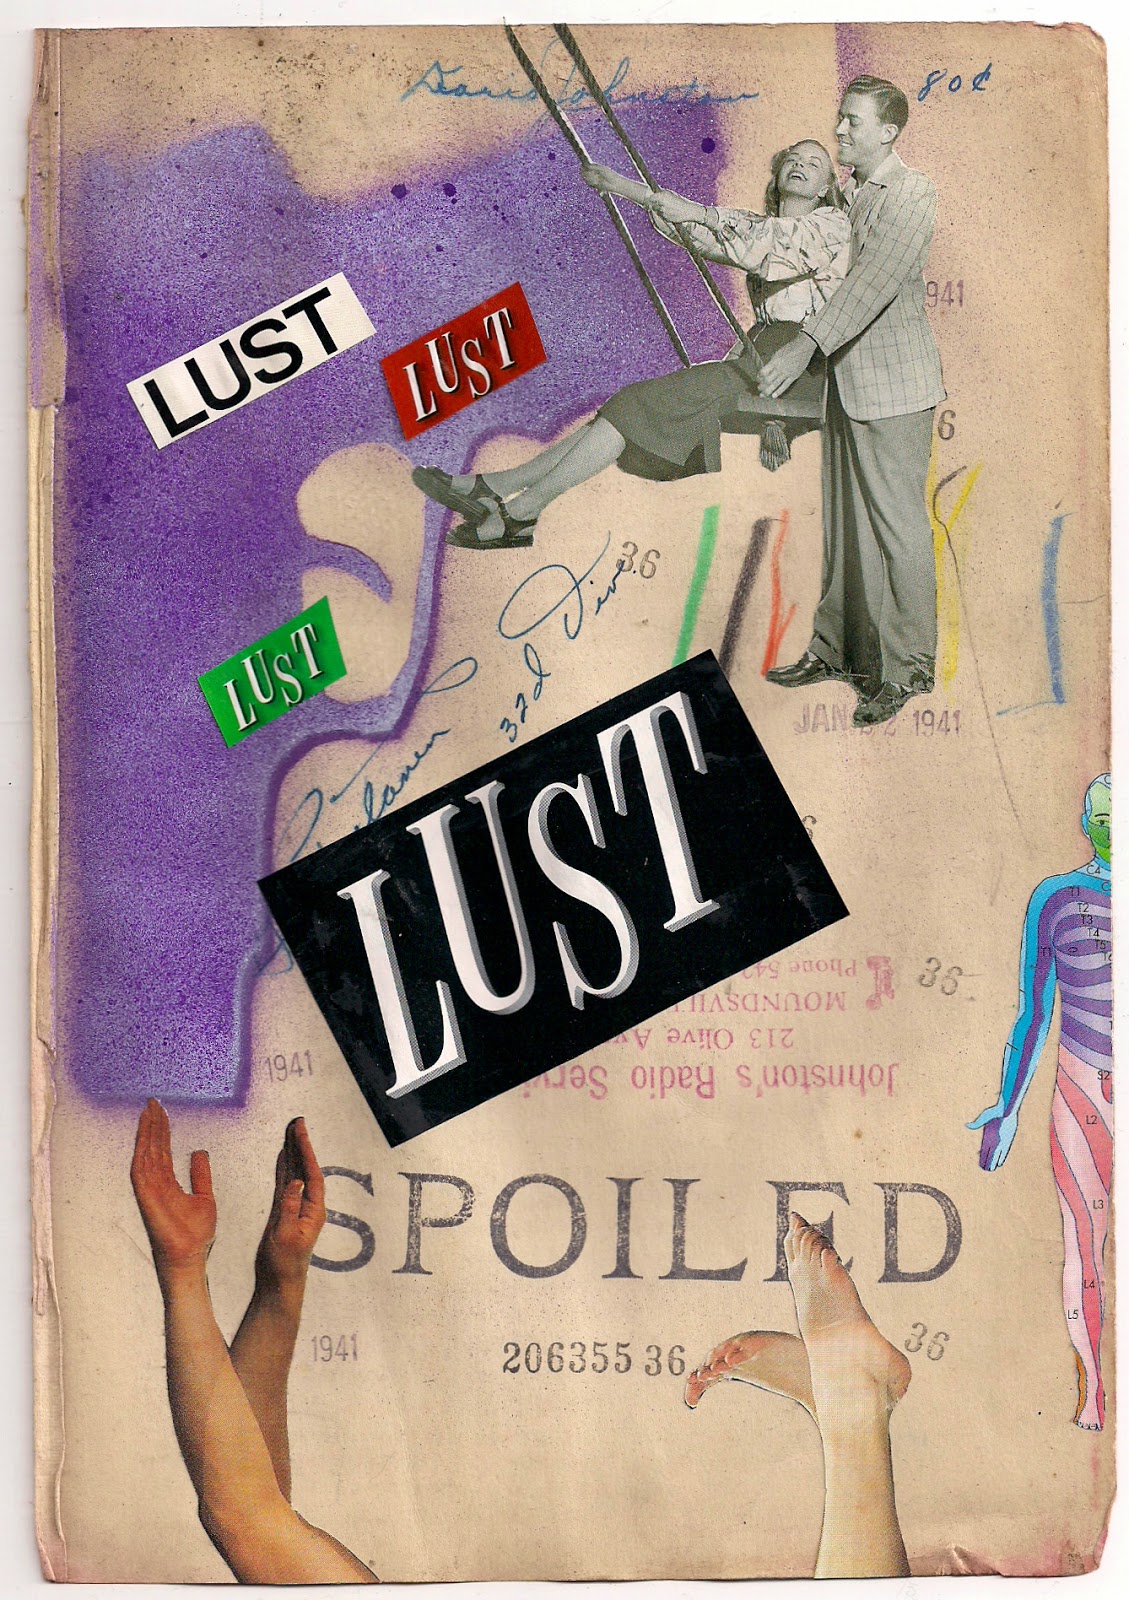 https://www.etsy.com/listing/183004921/spoiled-lust-by-diane-irby-original